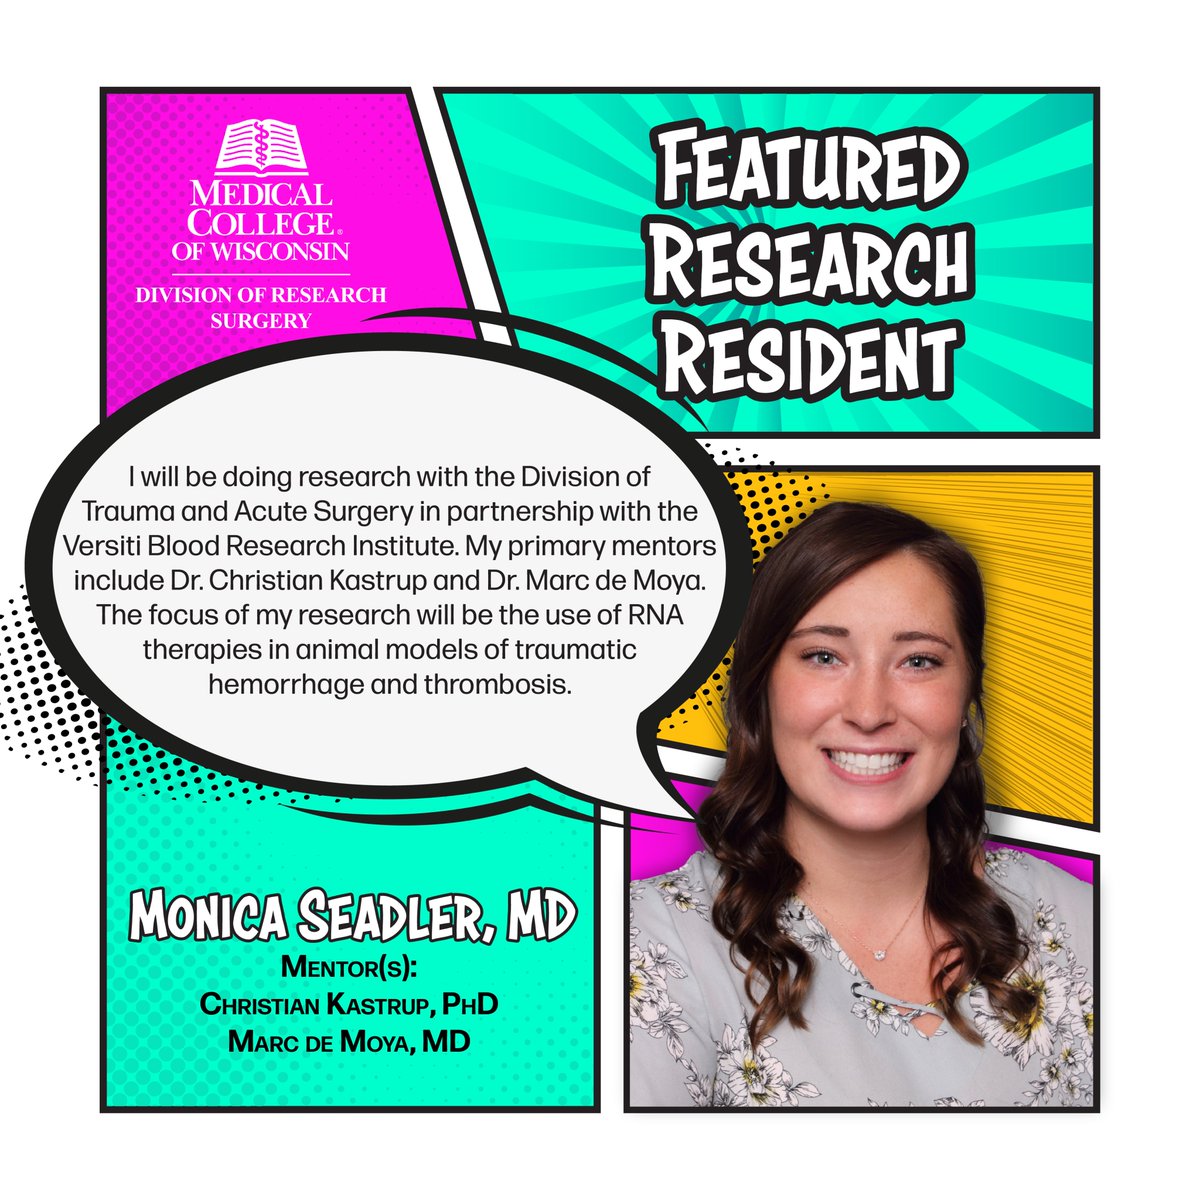 This month, we're featuring Monica Seadler, MD! Check out what Dr. Seadler has been up to with her mentors! #LeadingTheWay @mademoya @MCWtraumaacs Monica will also be presenting at Research Roundtable on April 25th!